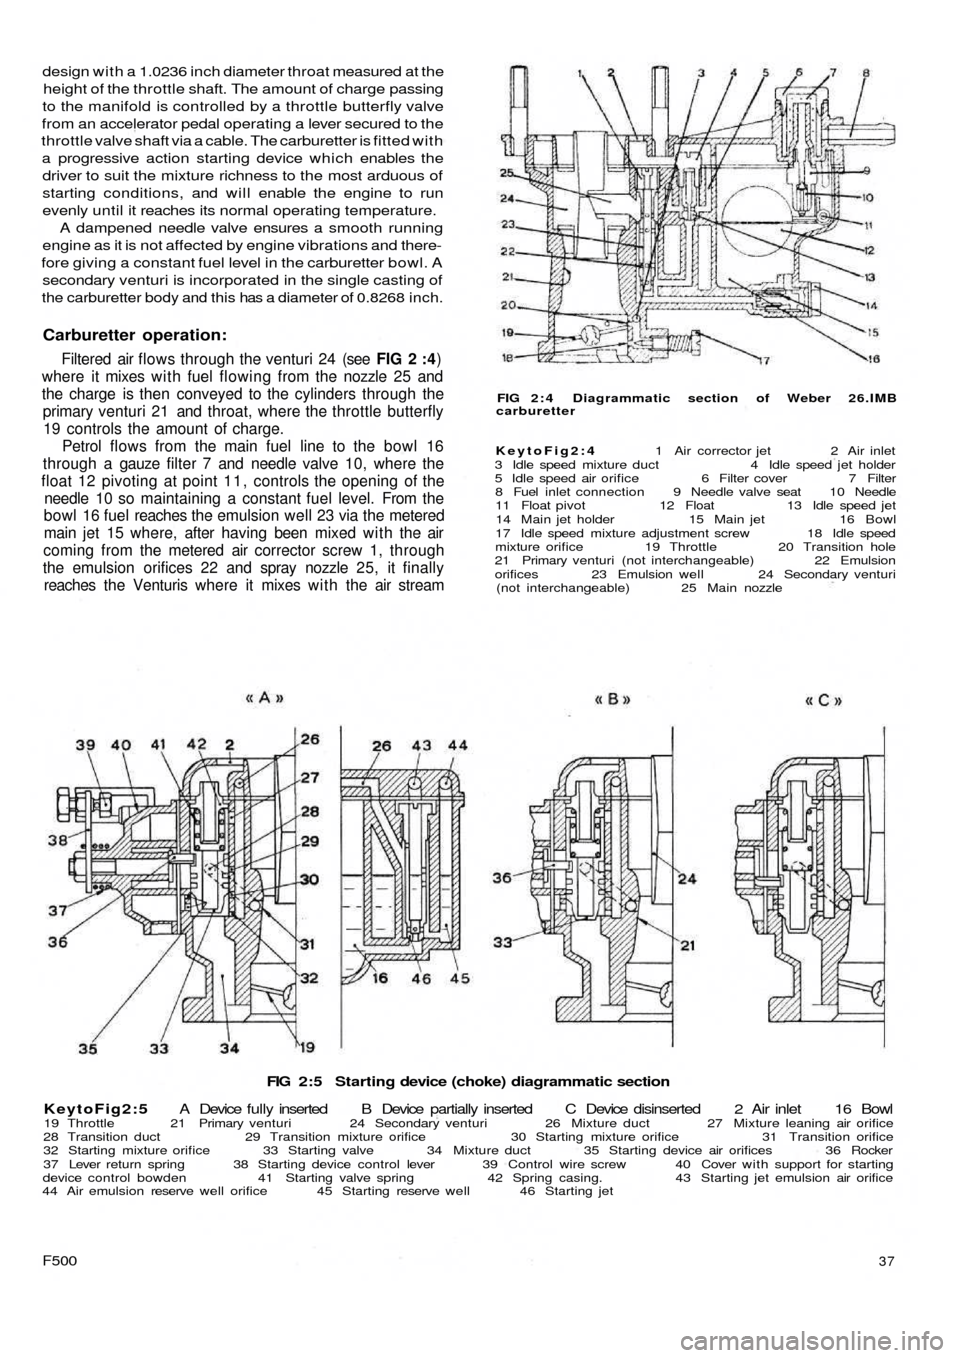 FIAT 500 1964 1.G Workshop Manual FIG 2:5  Starting device (choke) diagrammatic section
KeytoFig2:5 A  Device  fully inserted  B  Device  partially  inserted  C  Device  disinserted  2  Air  inlet 16 Bowl
19 Throttle  21 Primary ventu